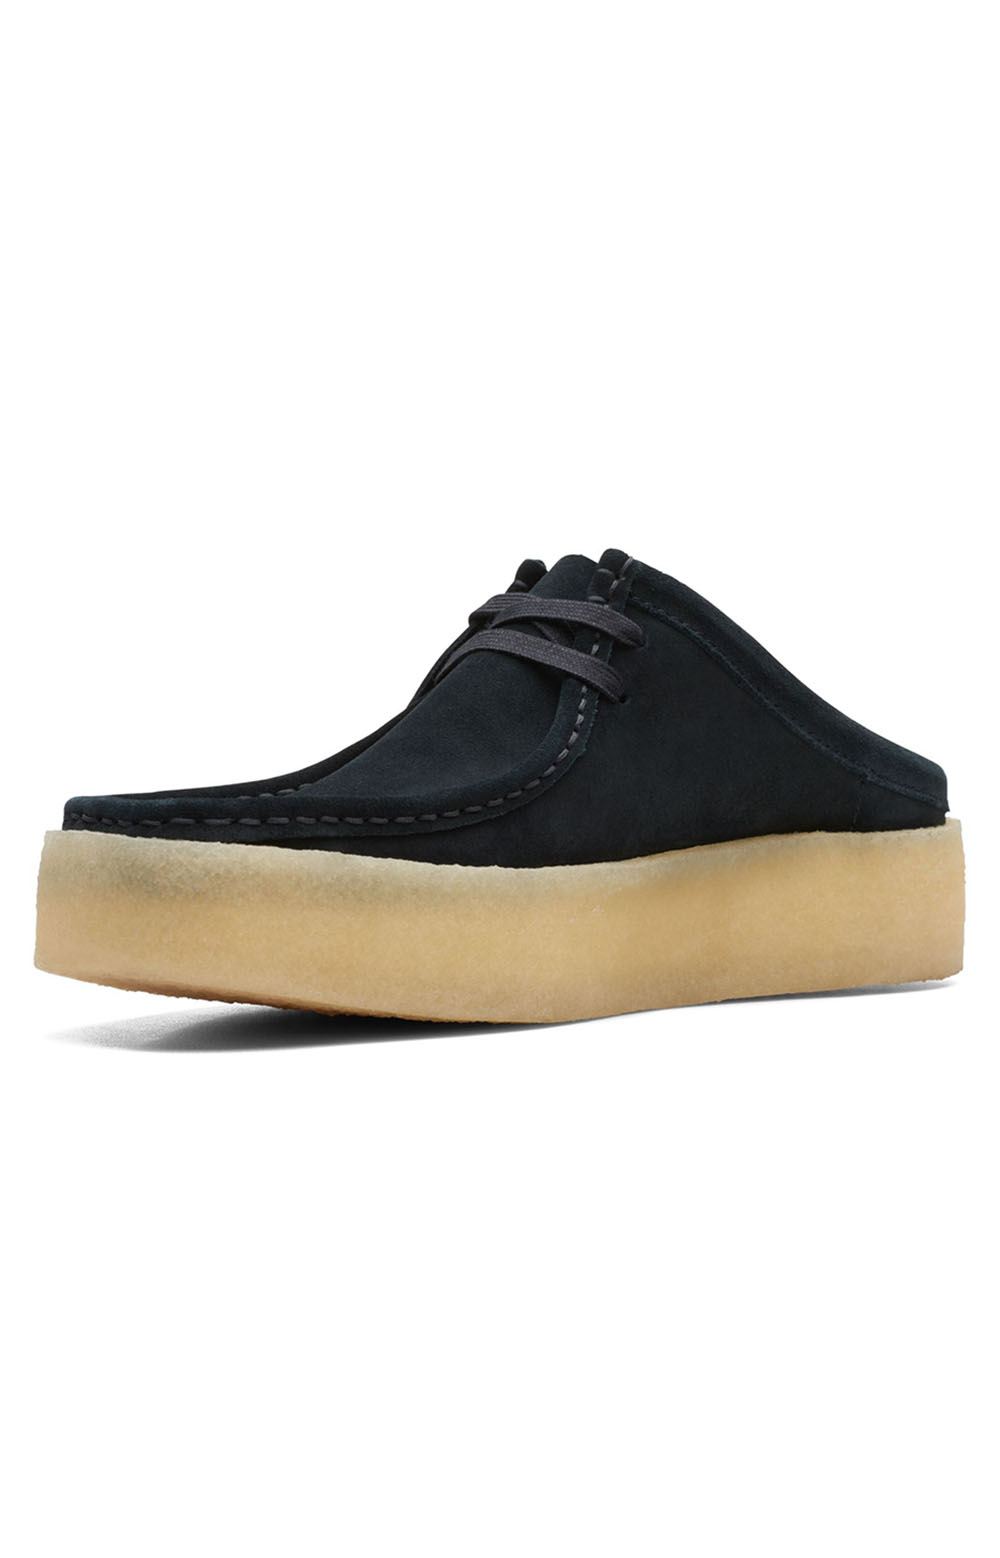 The Clarks Originals Wallabee Cup Low Men's Black Suede 26167285 shoes paired with casual denim jeans for a stylish and comfortable look